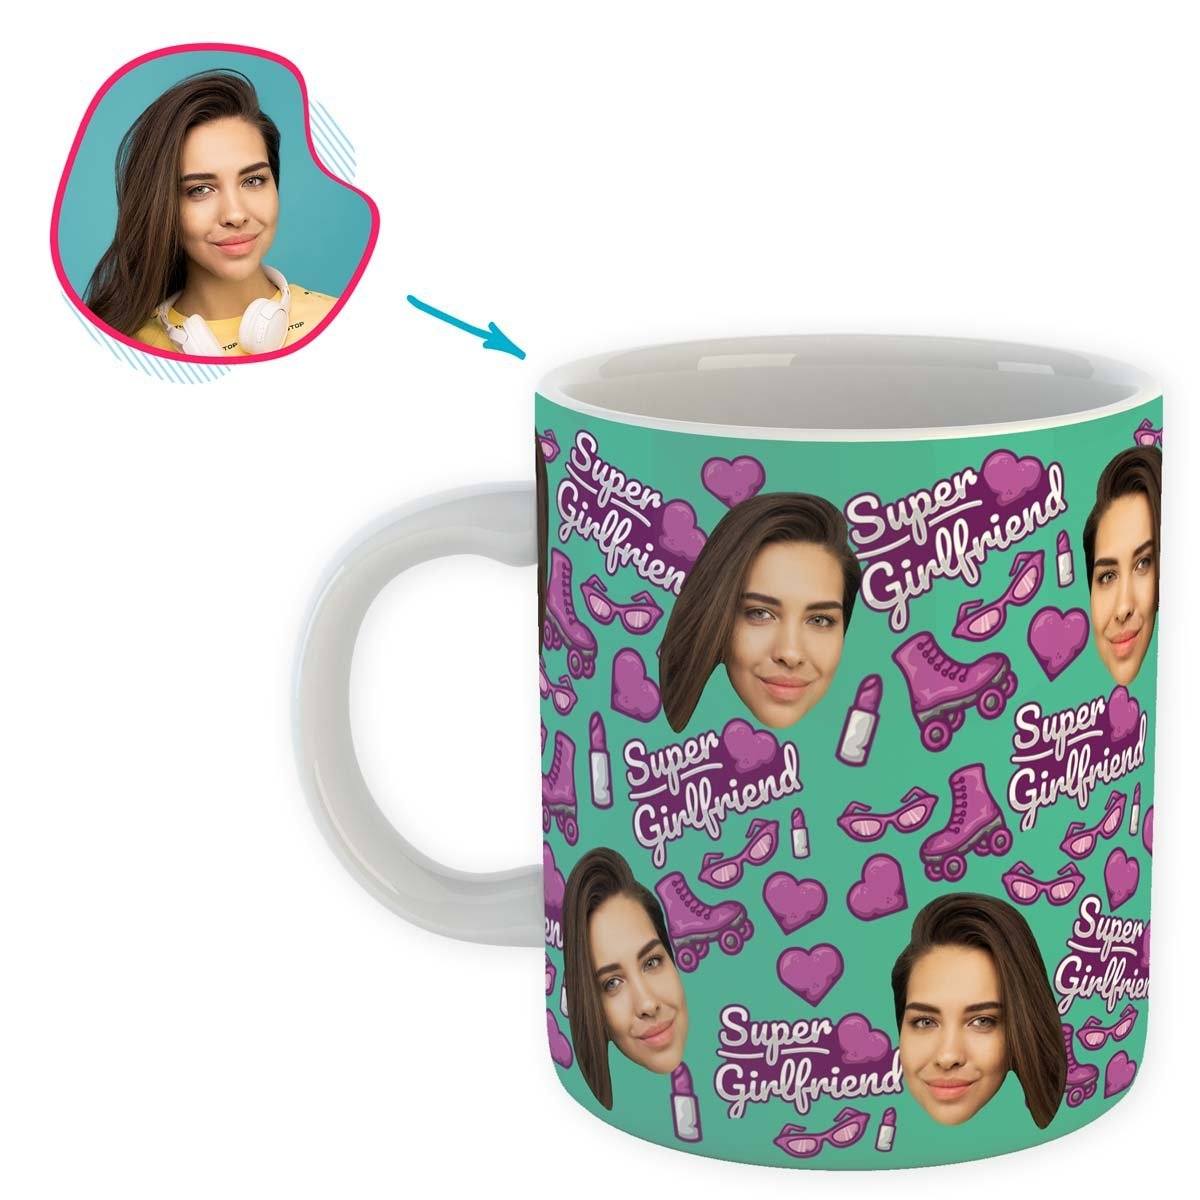 Mint Girlfriend personalized mug with photo of face printed on it